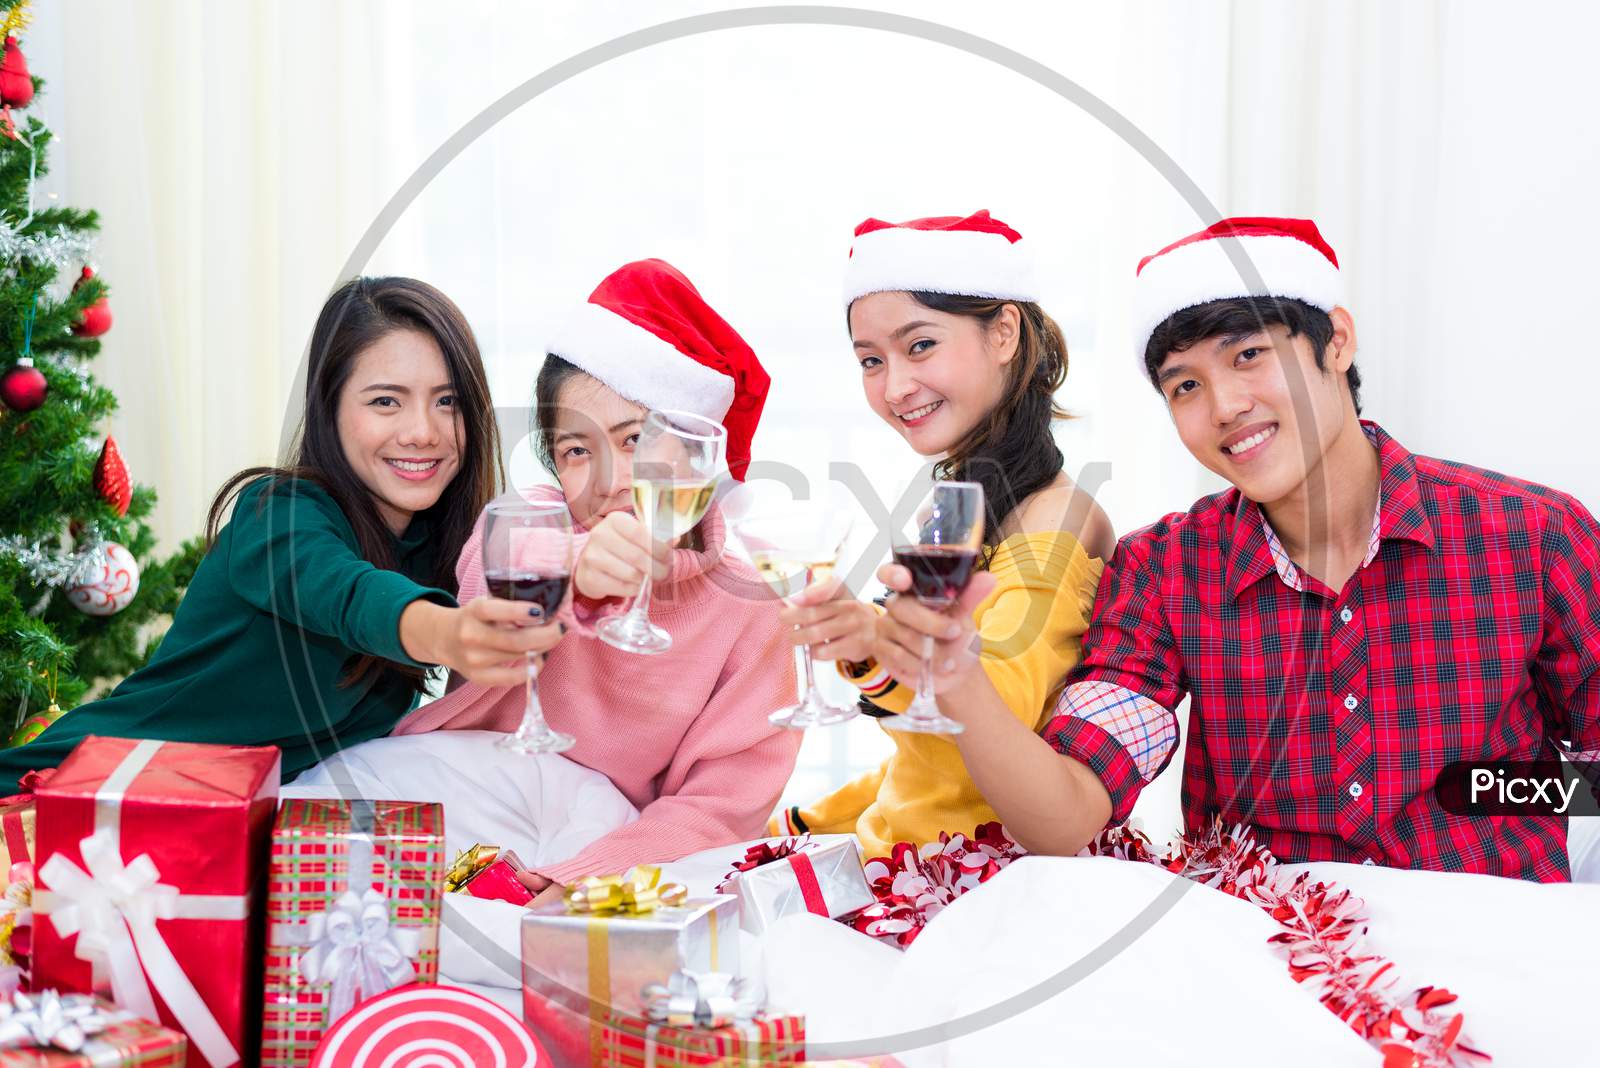 Group Of Young Asian People Celebrating New Year Party In Home With Wine Drinking Glasses. New Year And Christmas Party Concept. Happiness And Friendship Concept. Relation And Funny Together Theme.